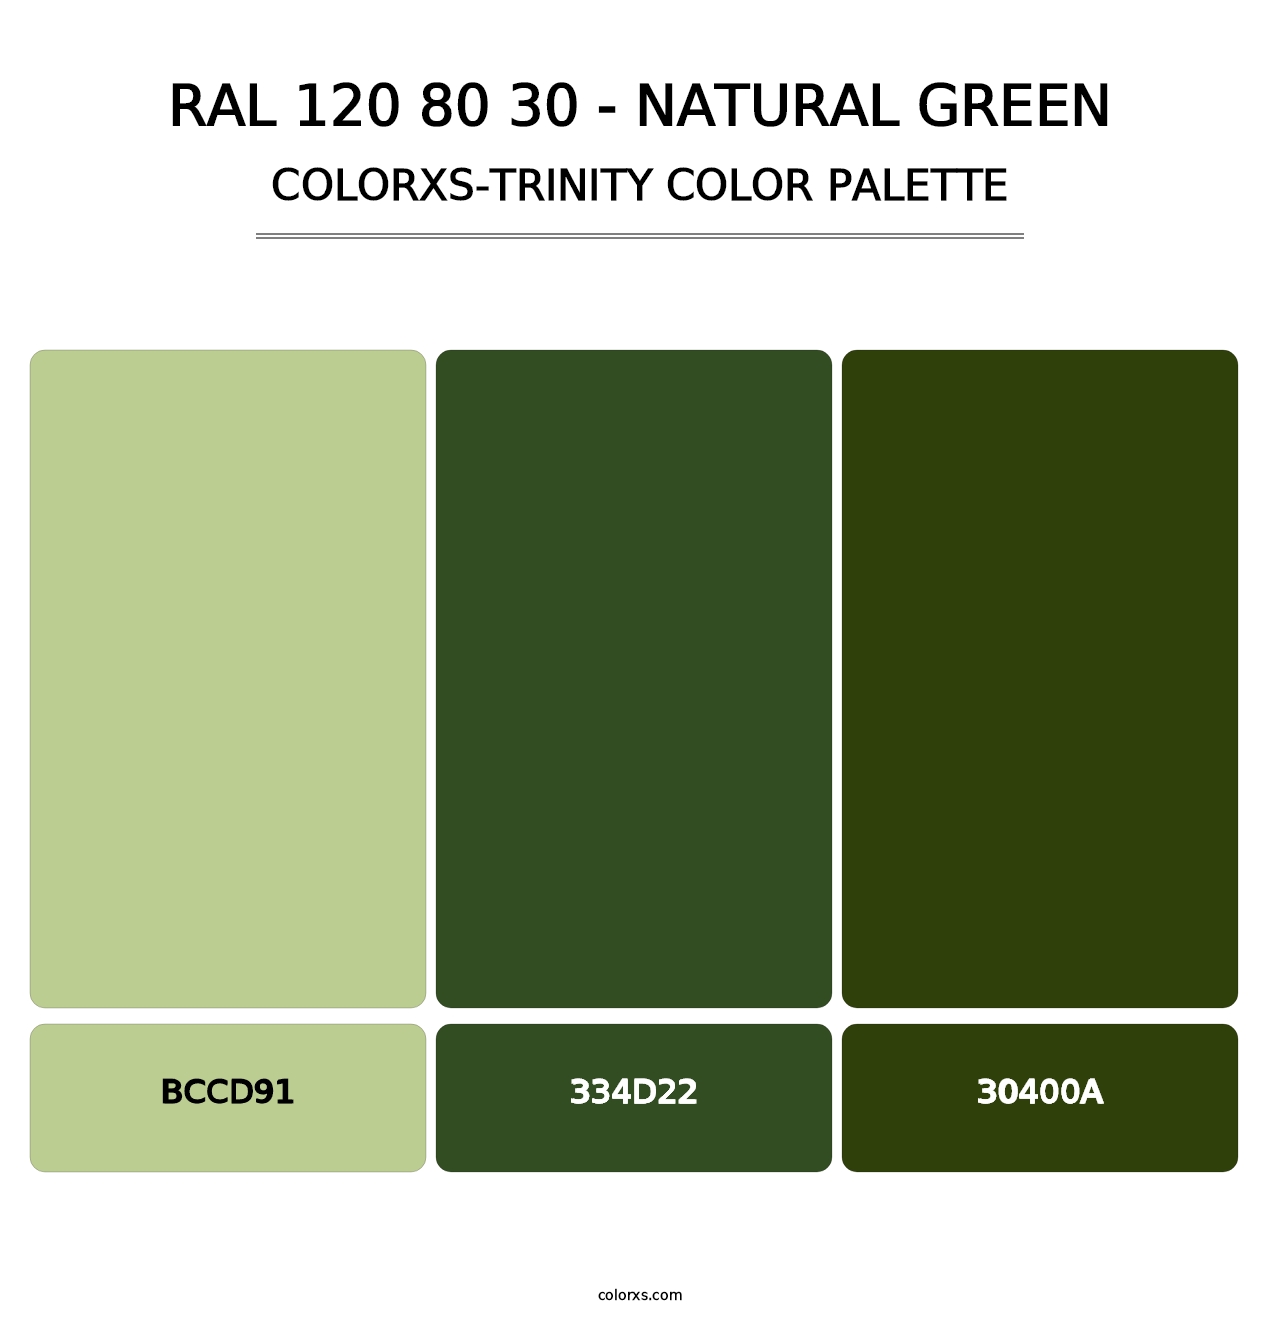 RAL 120 80 30 - Natural Green - Colorxs Trinity Palette